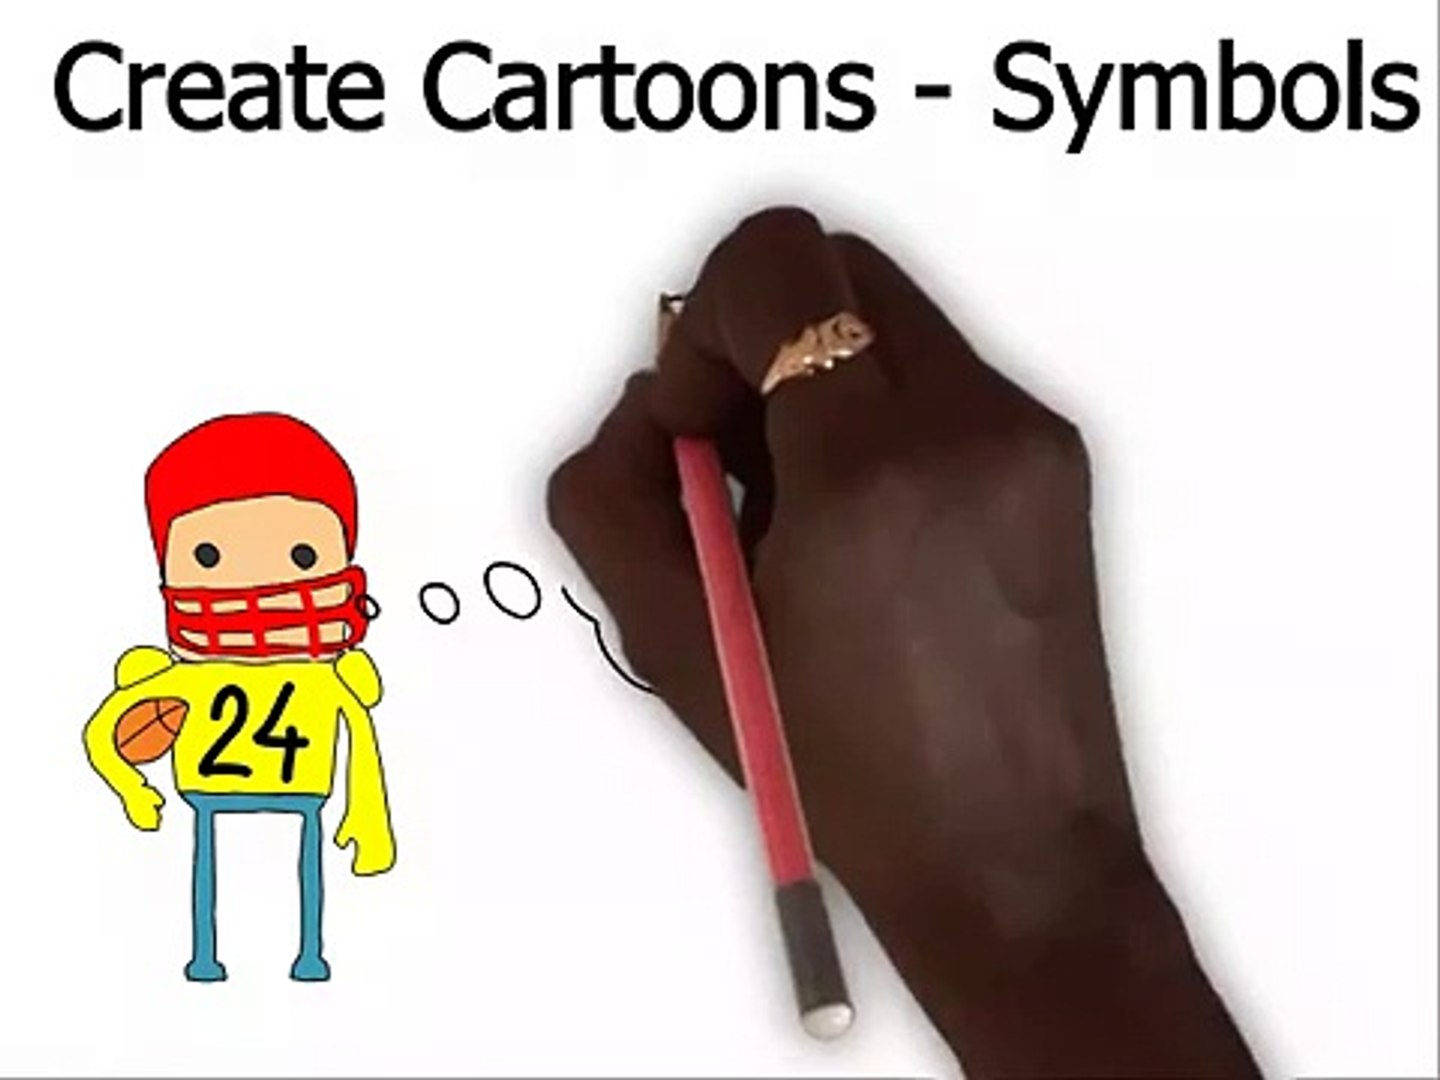 How To Create Animations - How To Make Cartoon Videos